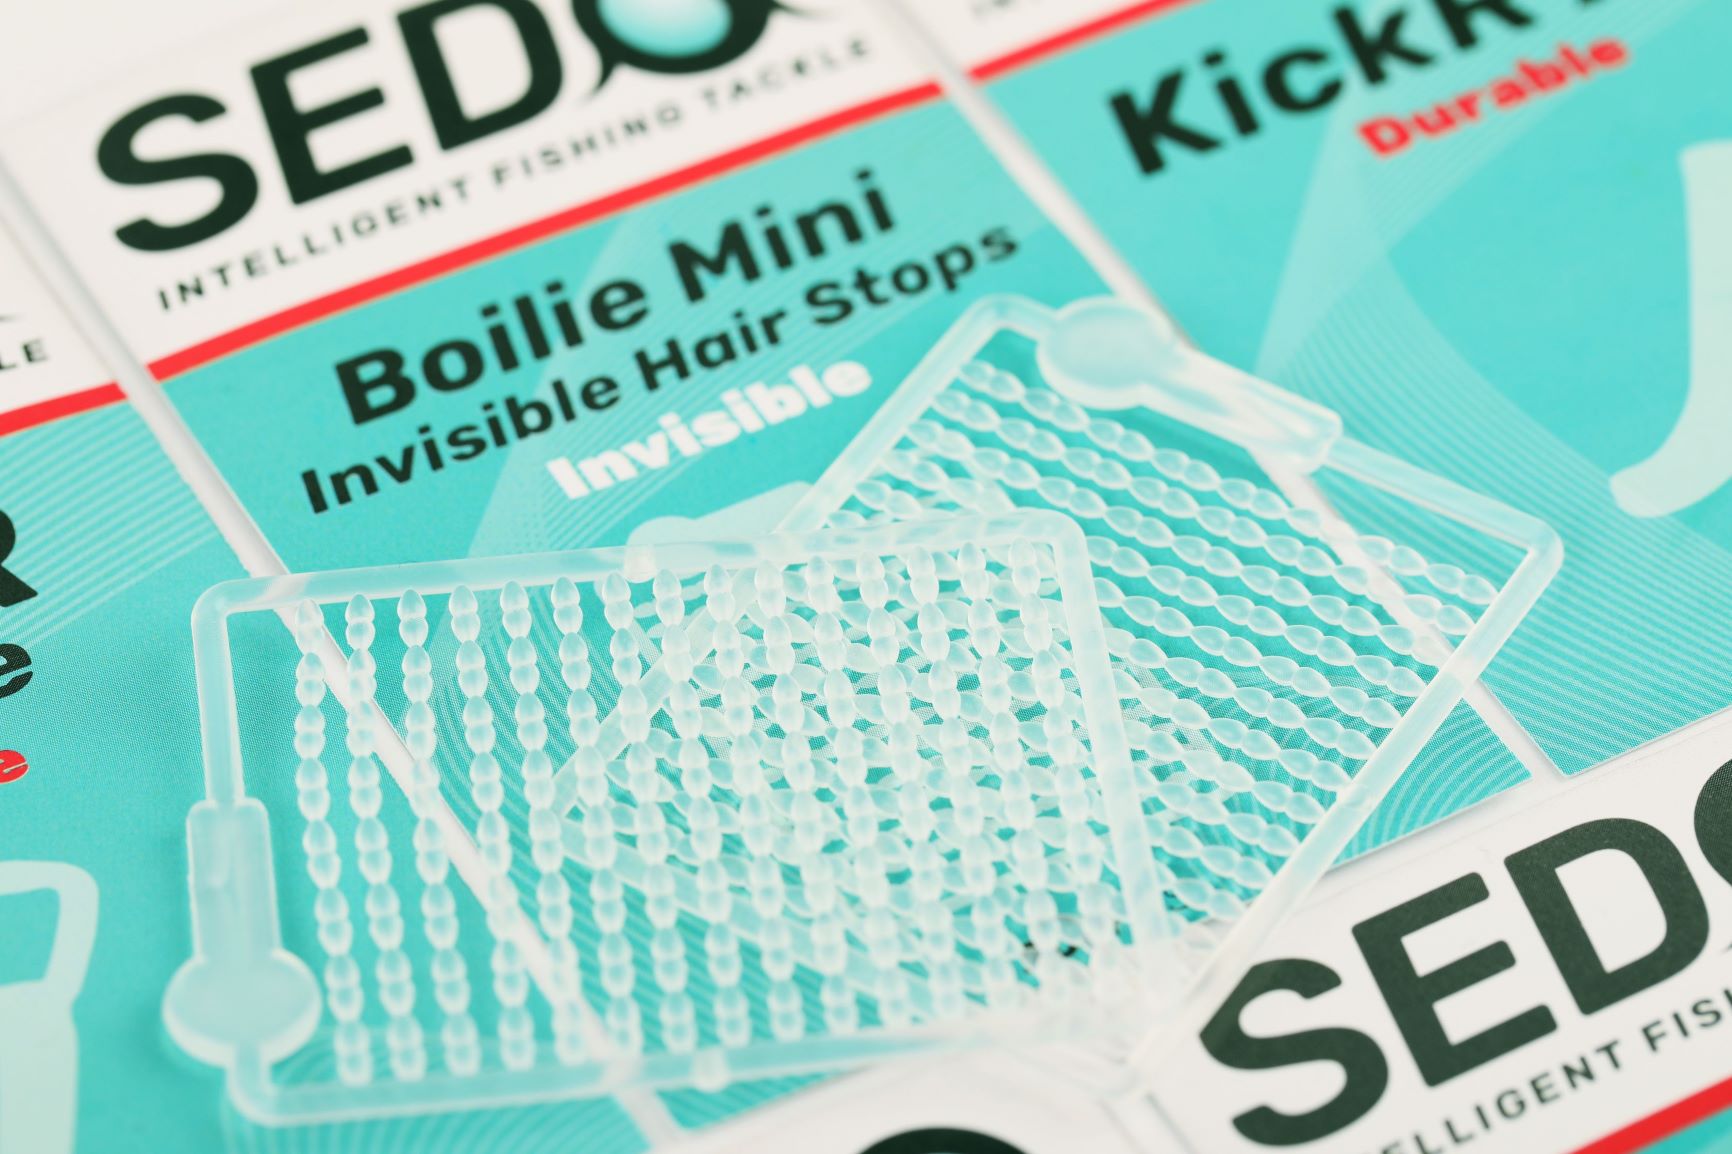 Sedo Boilie Mini Invisible Hair Stops